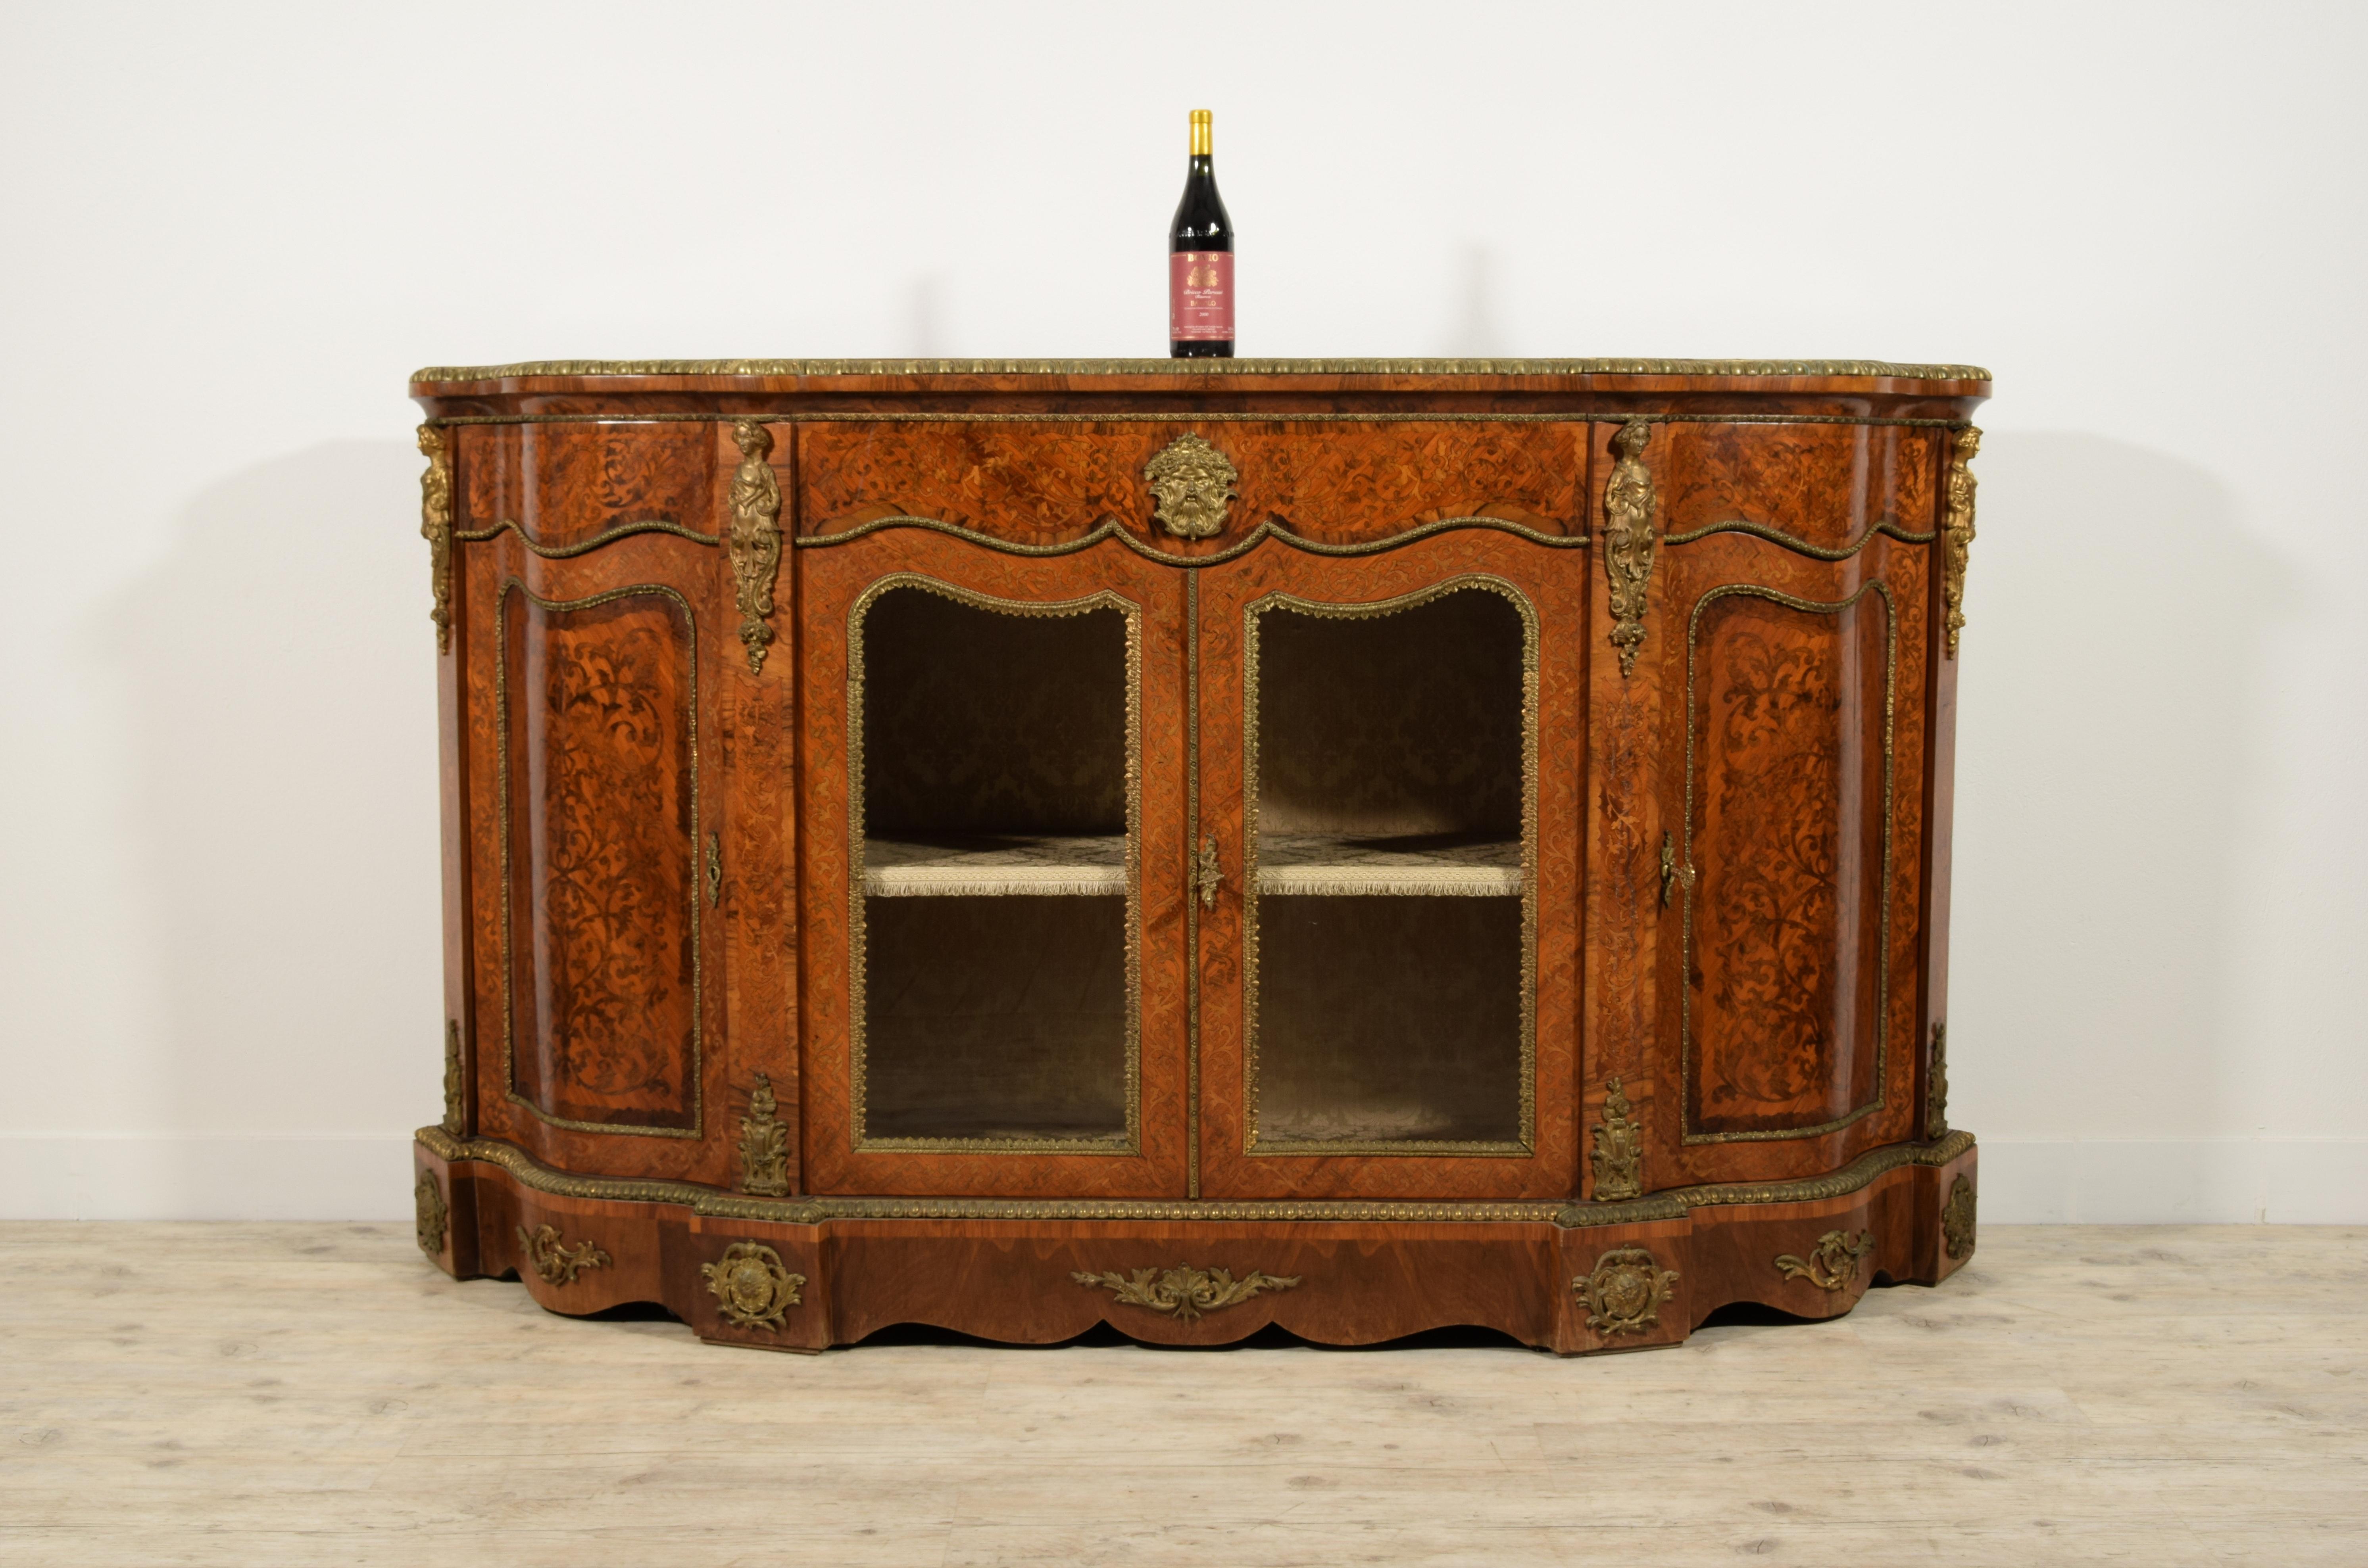 Inlaid wood sideboard with gilt bronzes
England, 19th century, Napoleon III

This elegant sideboard is made of wood veneered in walnut wood with refined inlays to form ornaments with phytomorphic motifs. 
The half-moon structure is moved. The